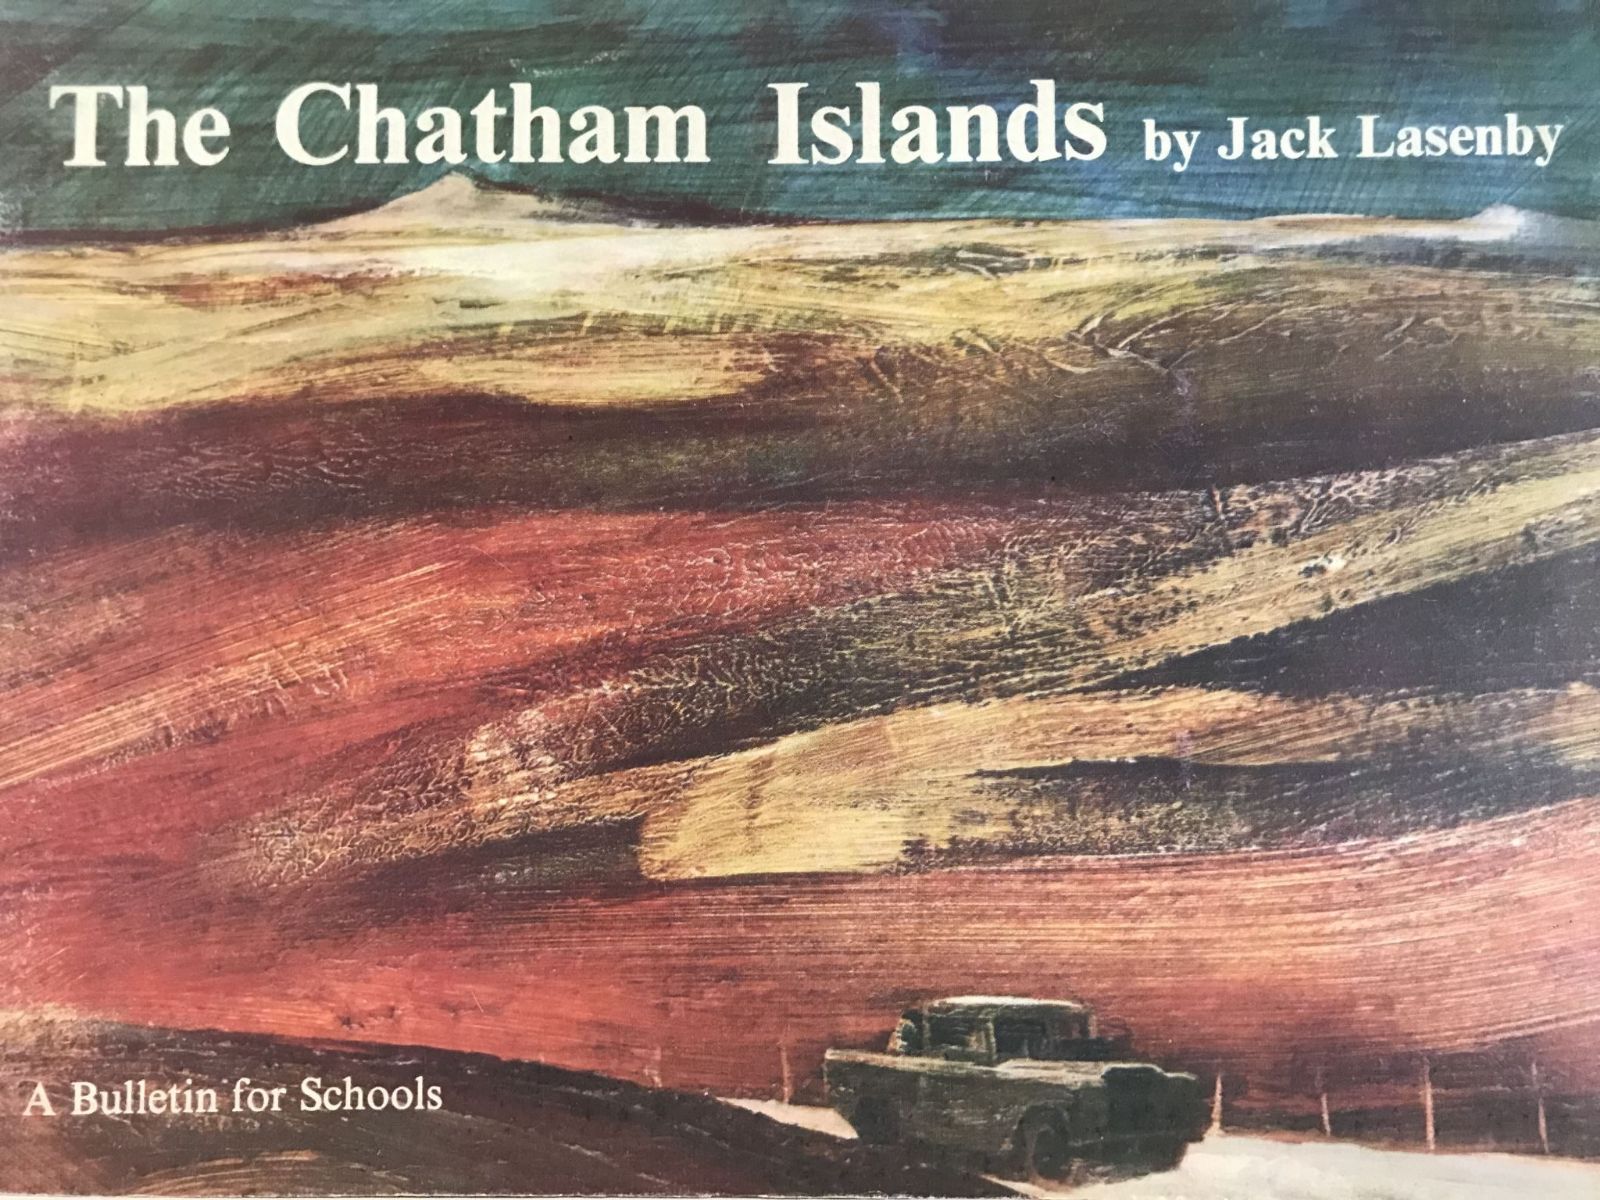 THE CHATHAM ISLANDS